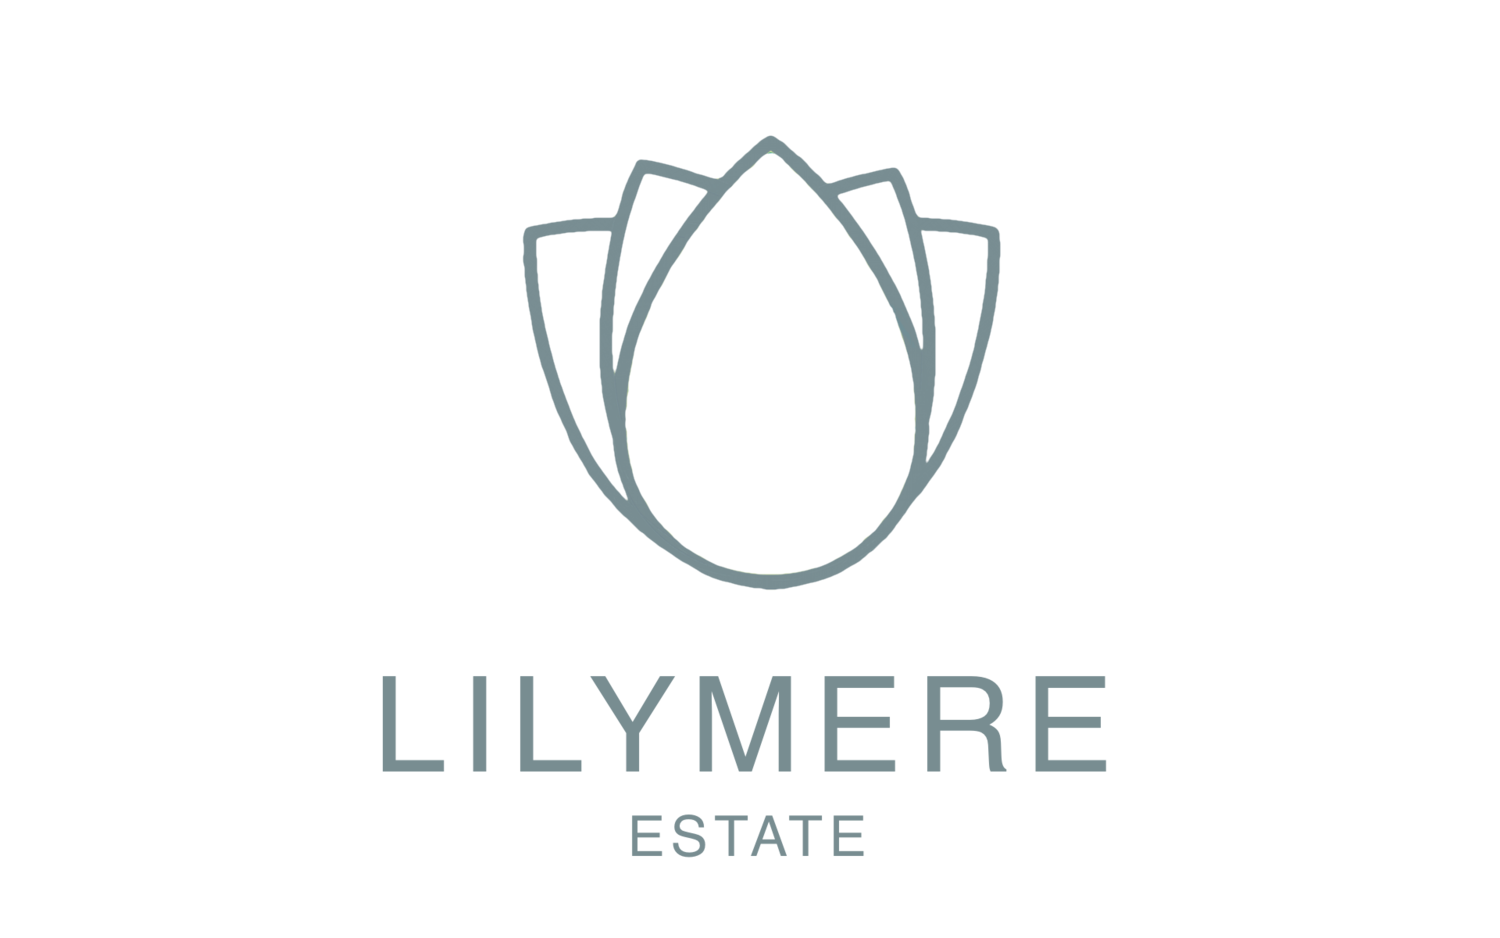 The Lilymere Estate